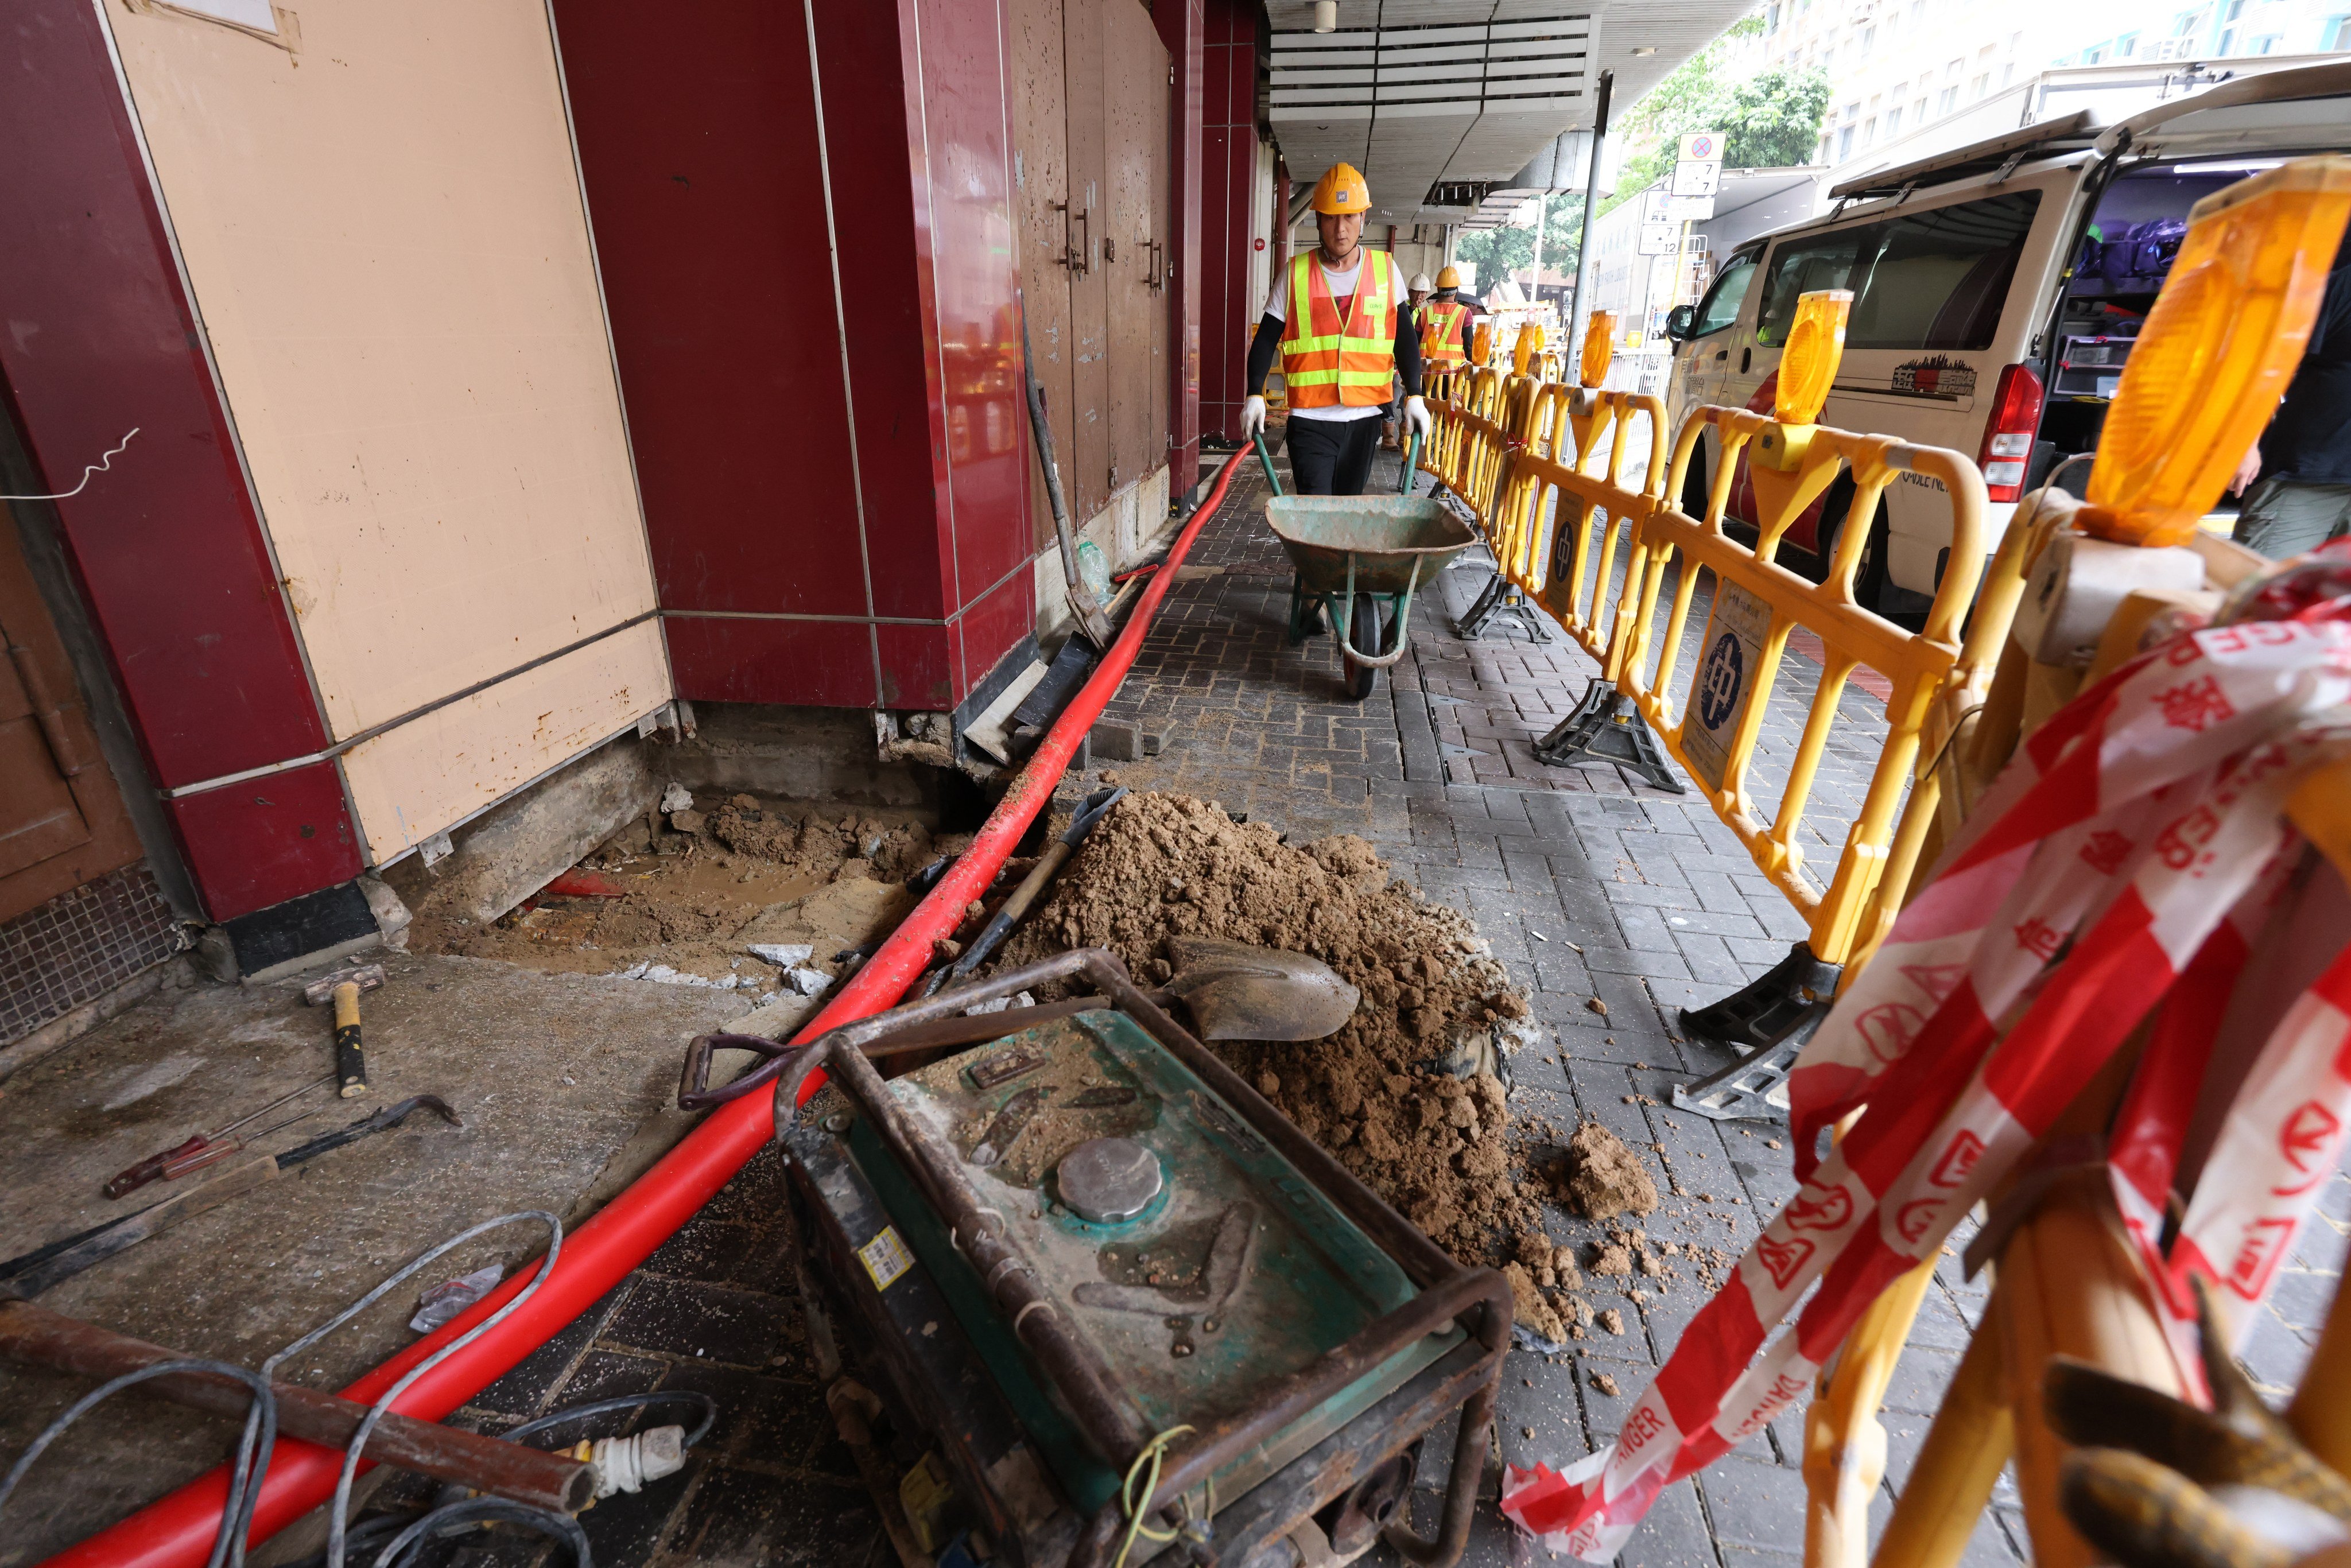 CLP Power workers carry out maintenance outside Lung Kwong House, in Lower Wong Tai Sin Estate, on June 13. The power company said a fault in an 11,000-volt underground cable in Wong Tai Sin caused power supply disruptions that left many customers in the dark. Photo: Jelly Tse